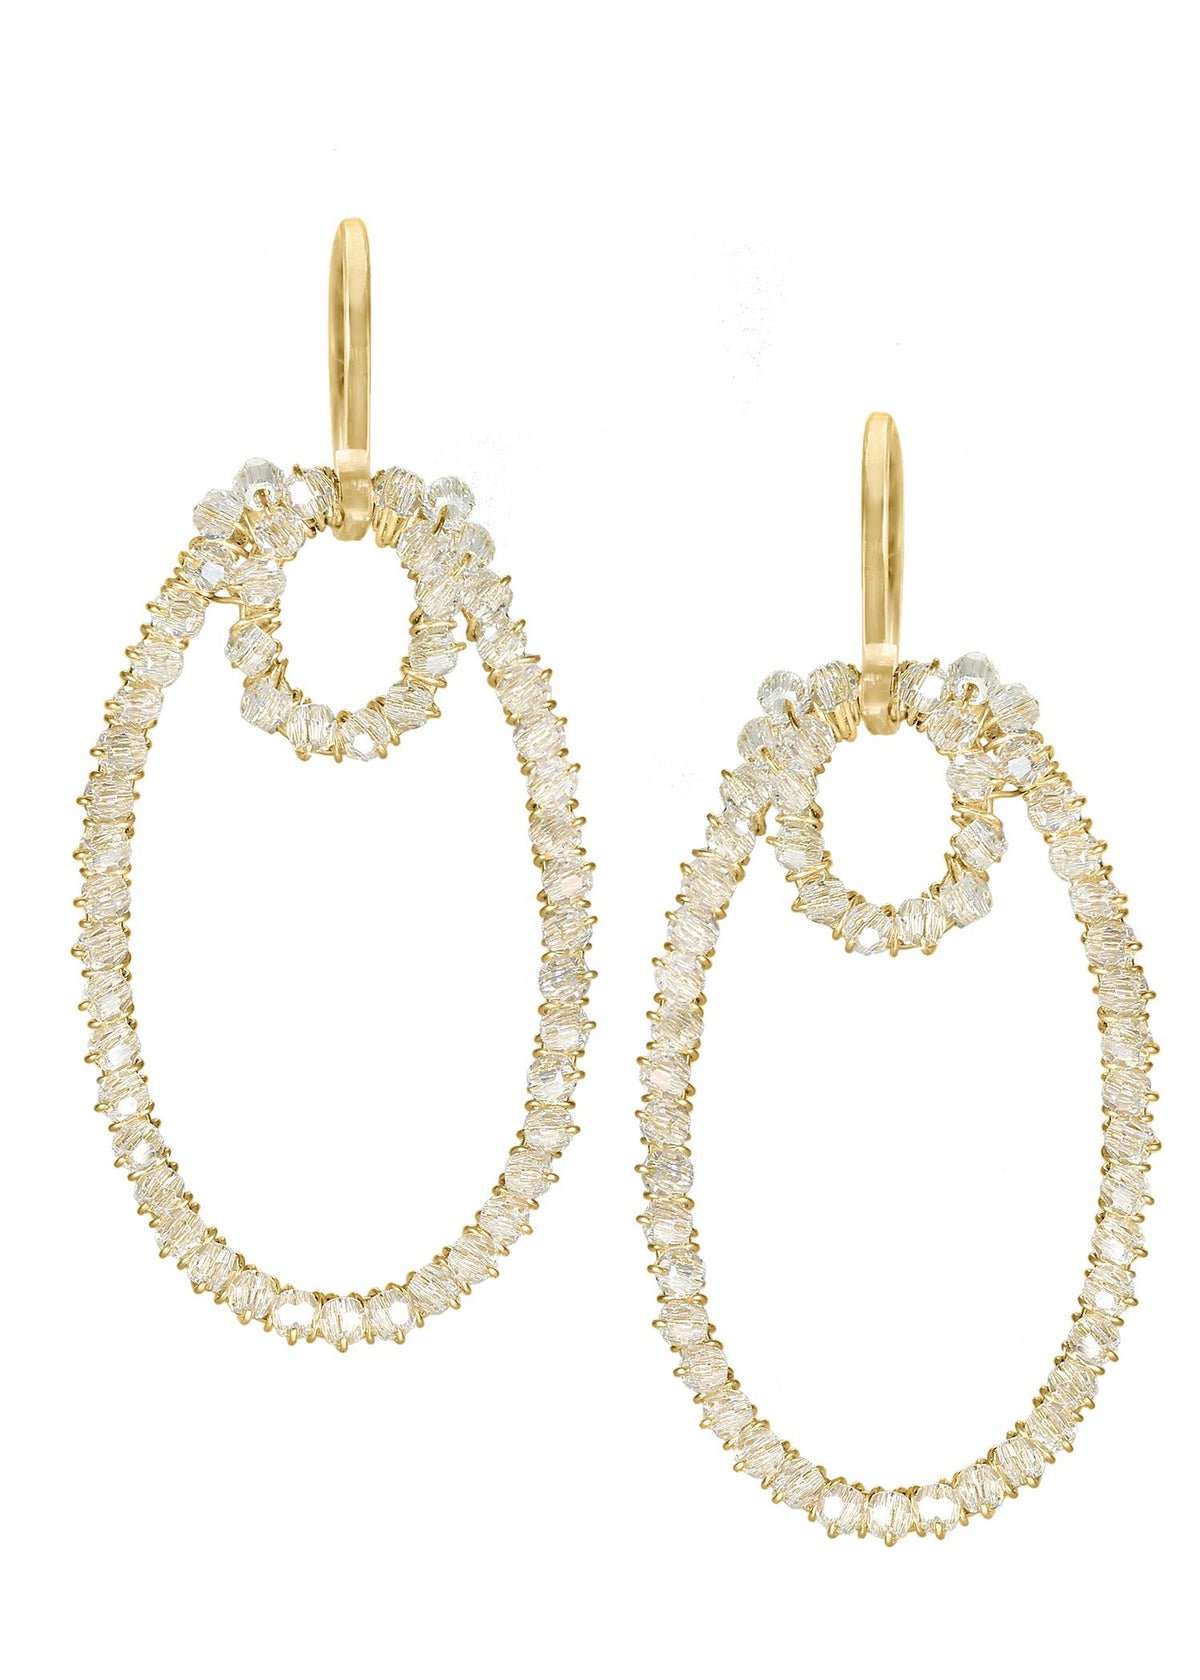 Crystal 14k gold fill Earrings measure 1-3/4&quot; in length (including ear wires) and 3/4&quot; in width Handmade in our Los Angeles studio